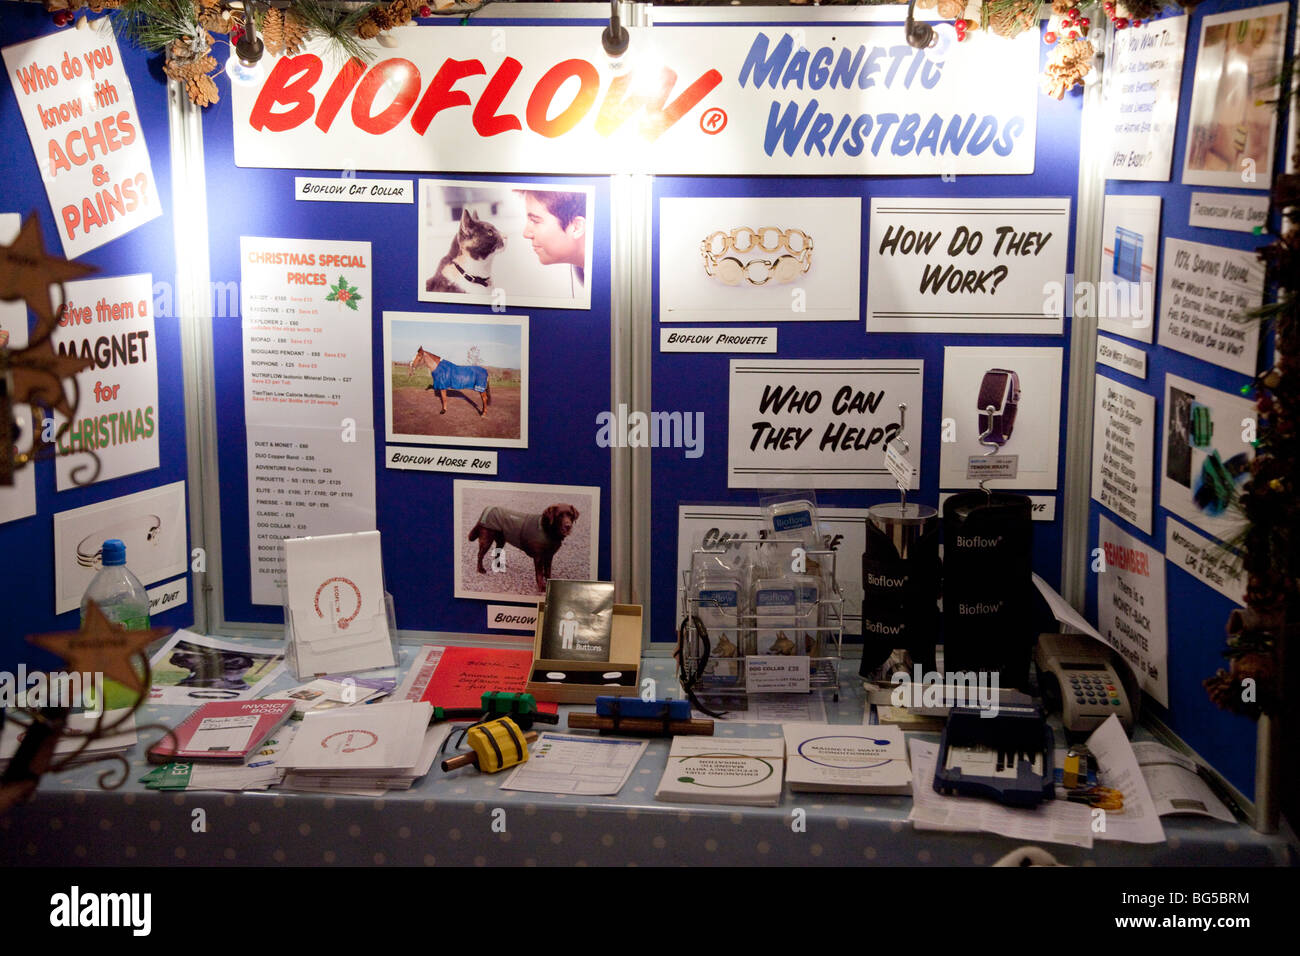 trade stand offering various 'Bioflow' magnetic treatments Stock Photo